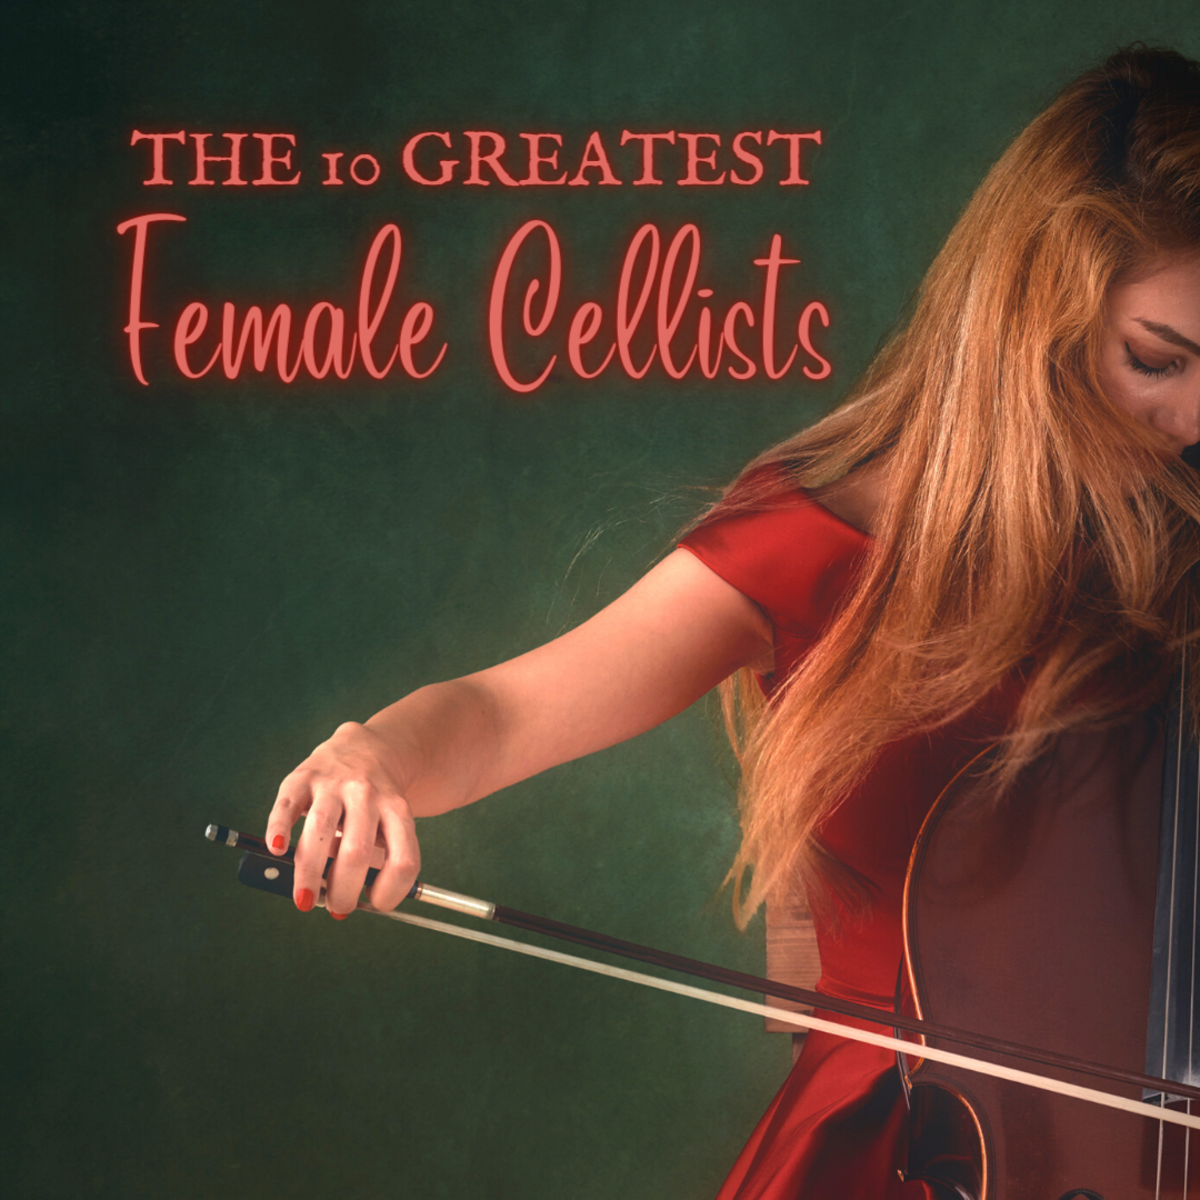 10 Great Female Cellists